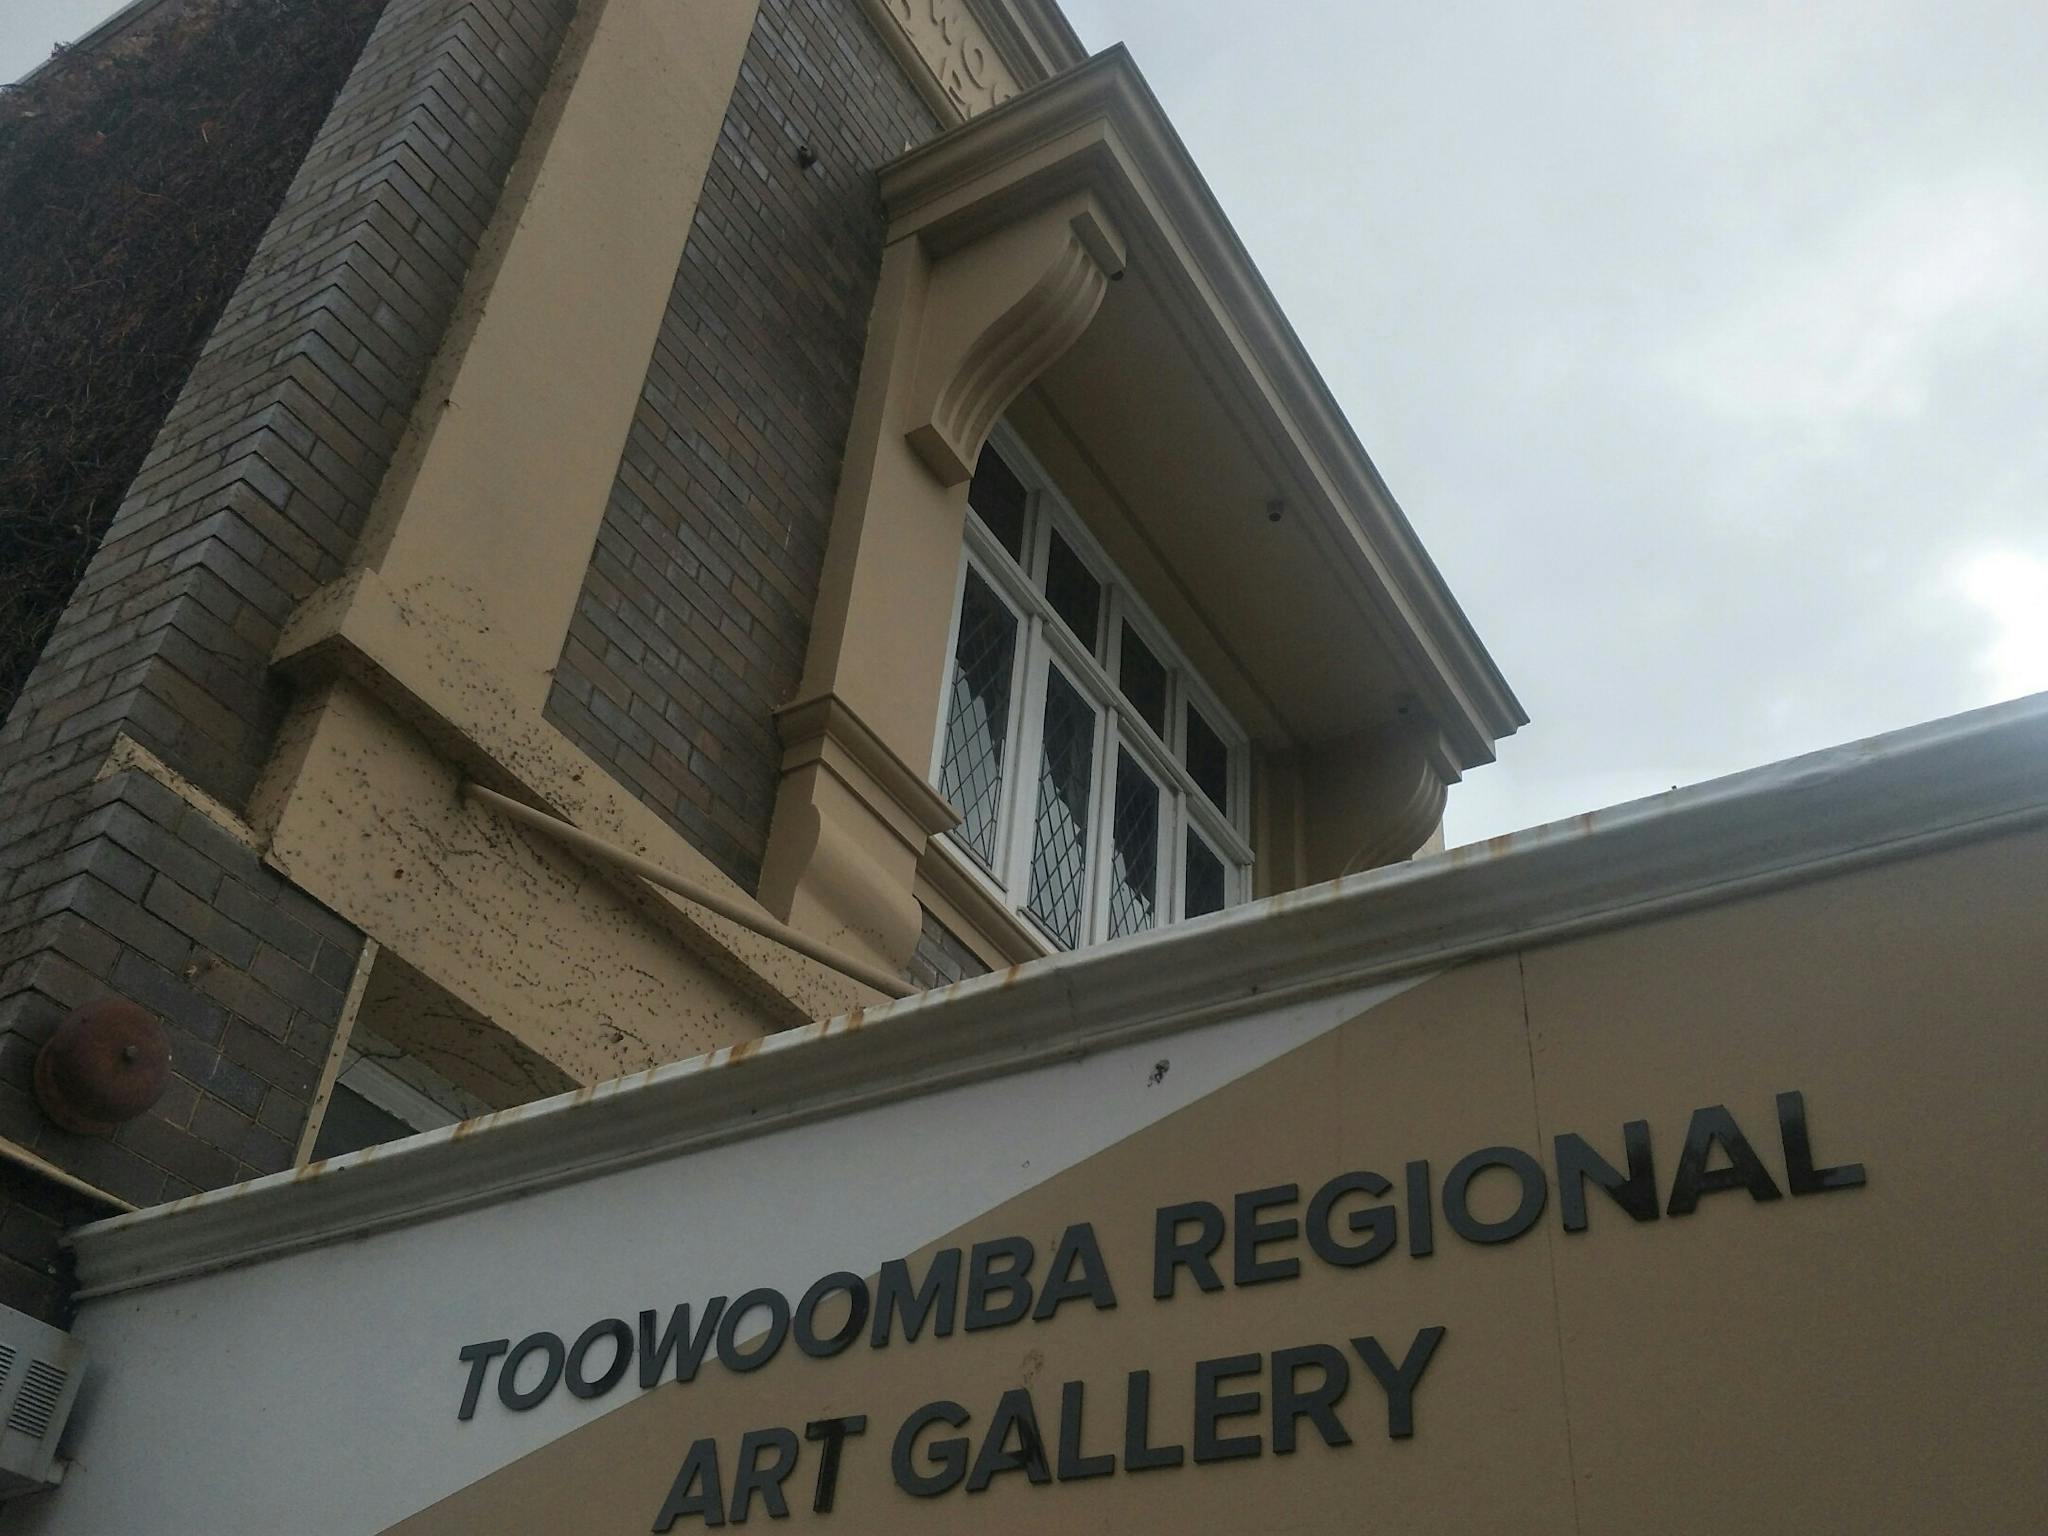 Toowoomba's Art Gallery allows you to appreciate the work of some outstanding Australian artists.